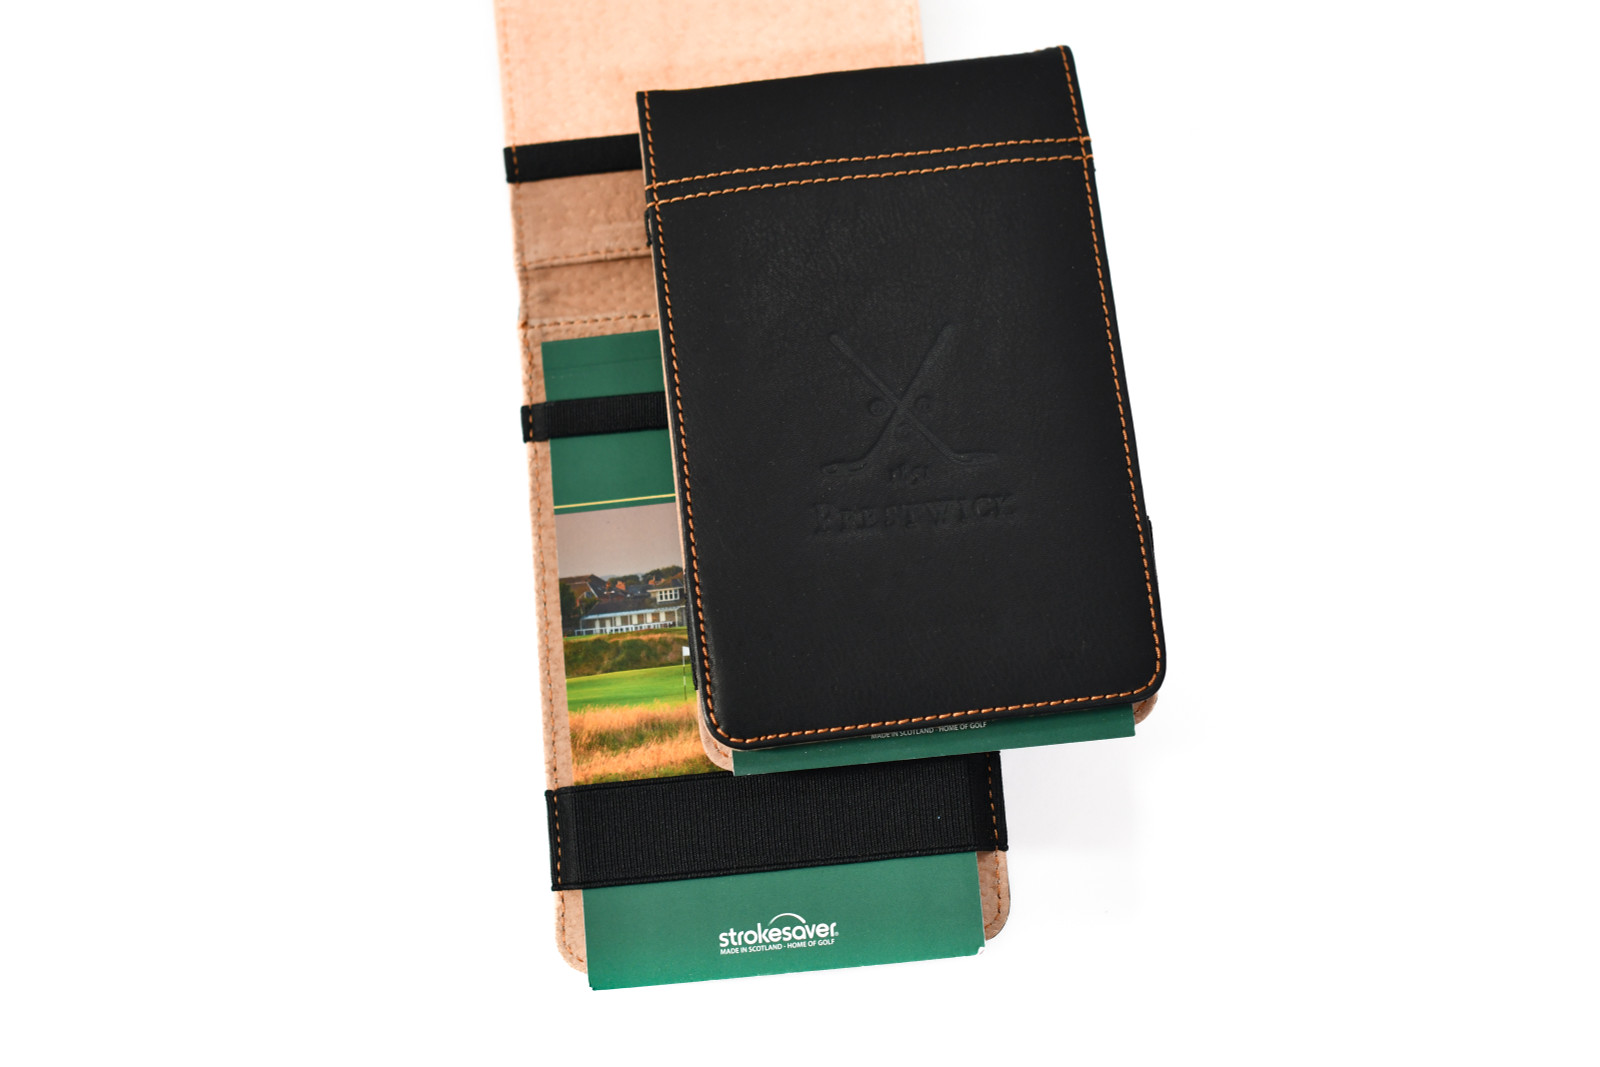 Links and Kings Leather Yardage book holder